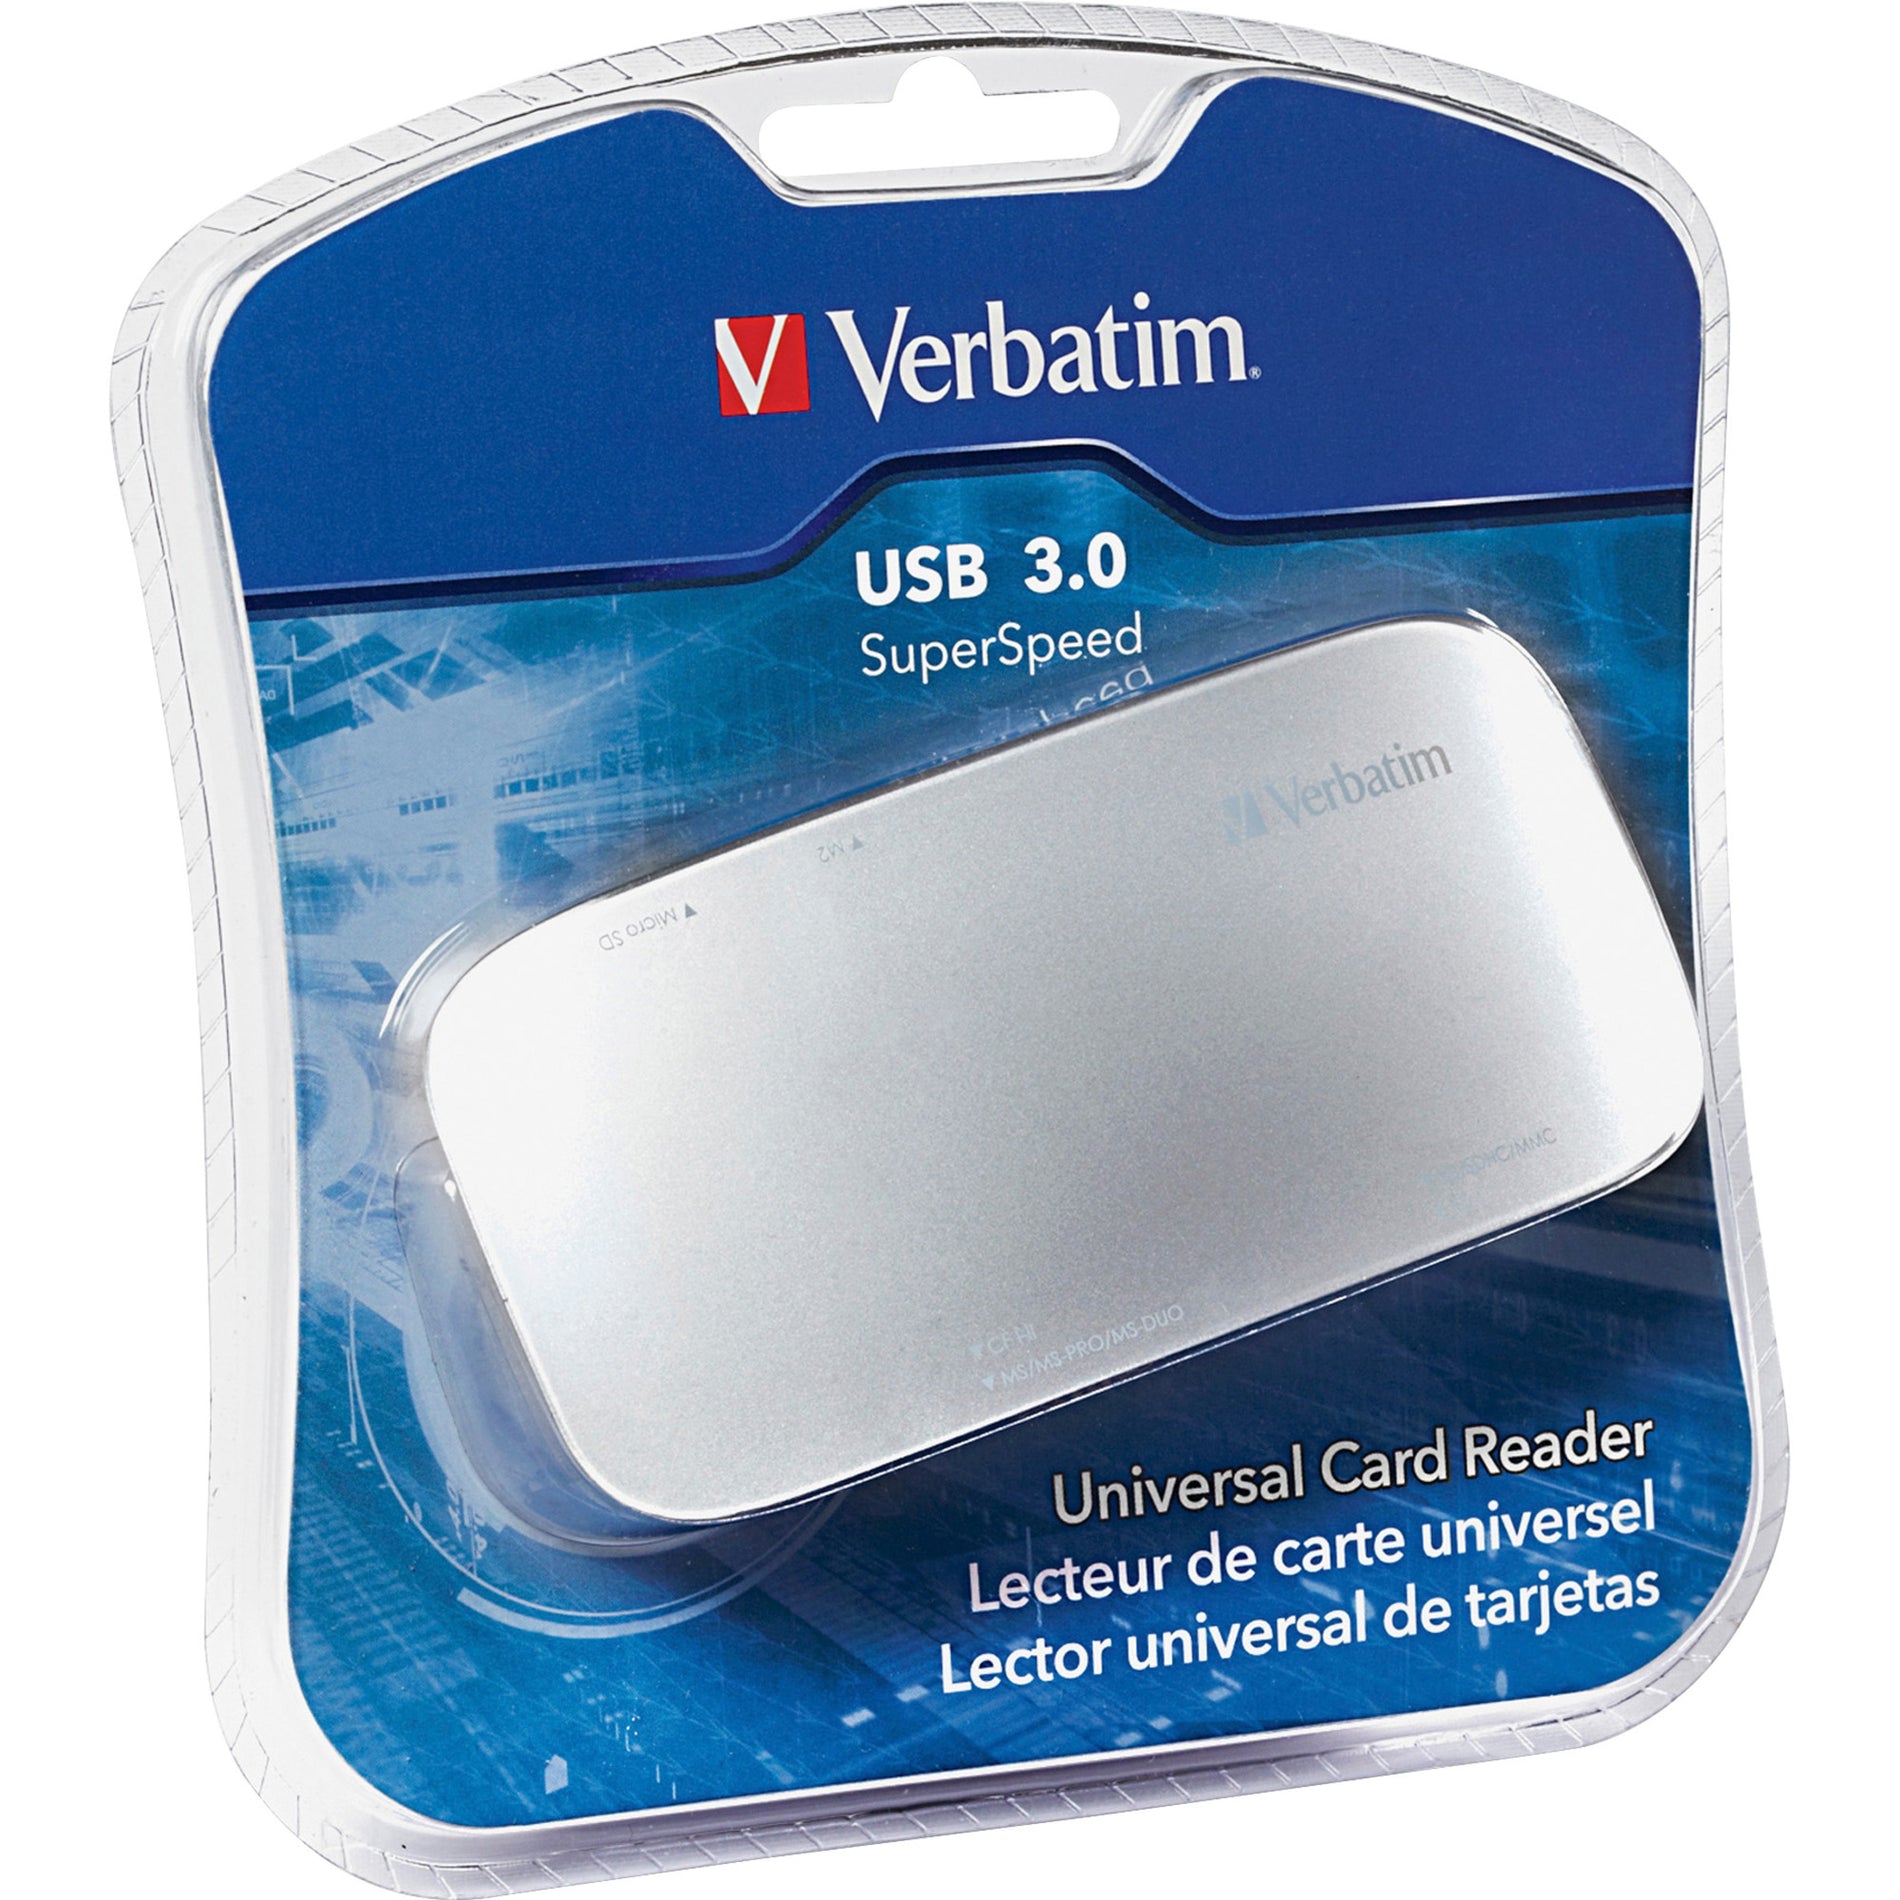 Verbatim 97706 USB 3.0 Universal Card Reader, Silver - High-Speed Data Transfer and Easy File Management